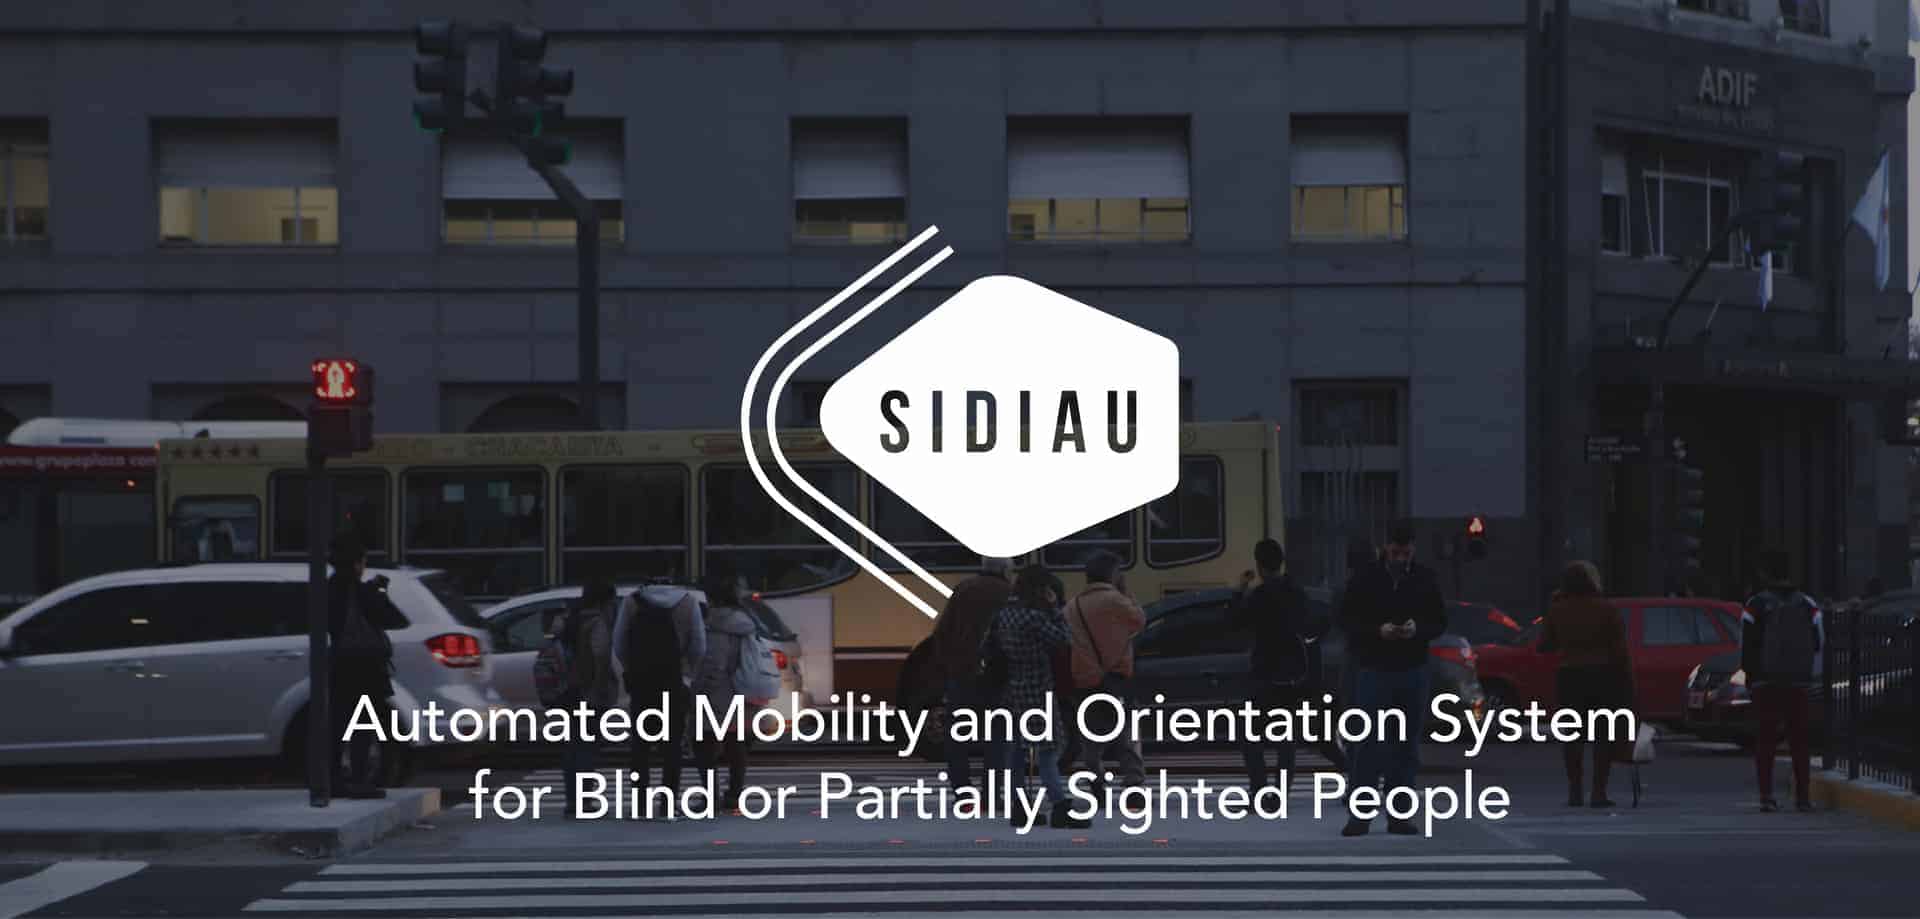 SIDIAU- Automated Mobility and Orientation System for Blind or Partially Sighted People